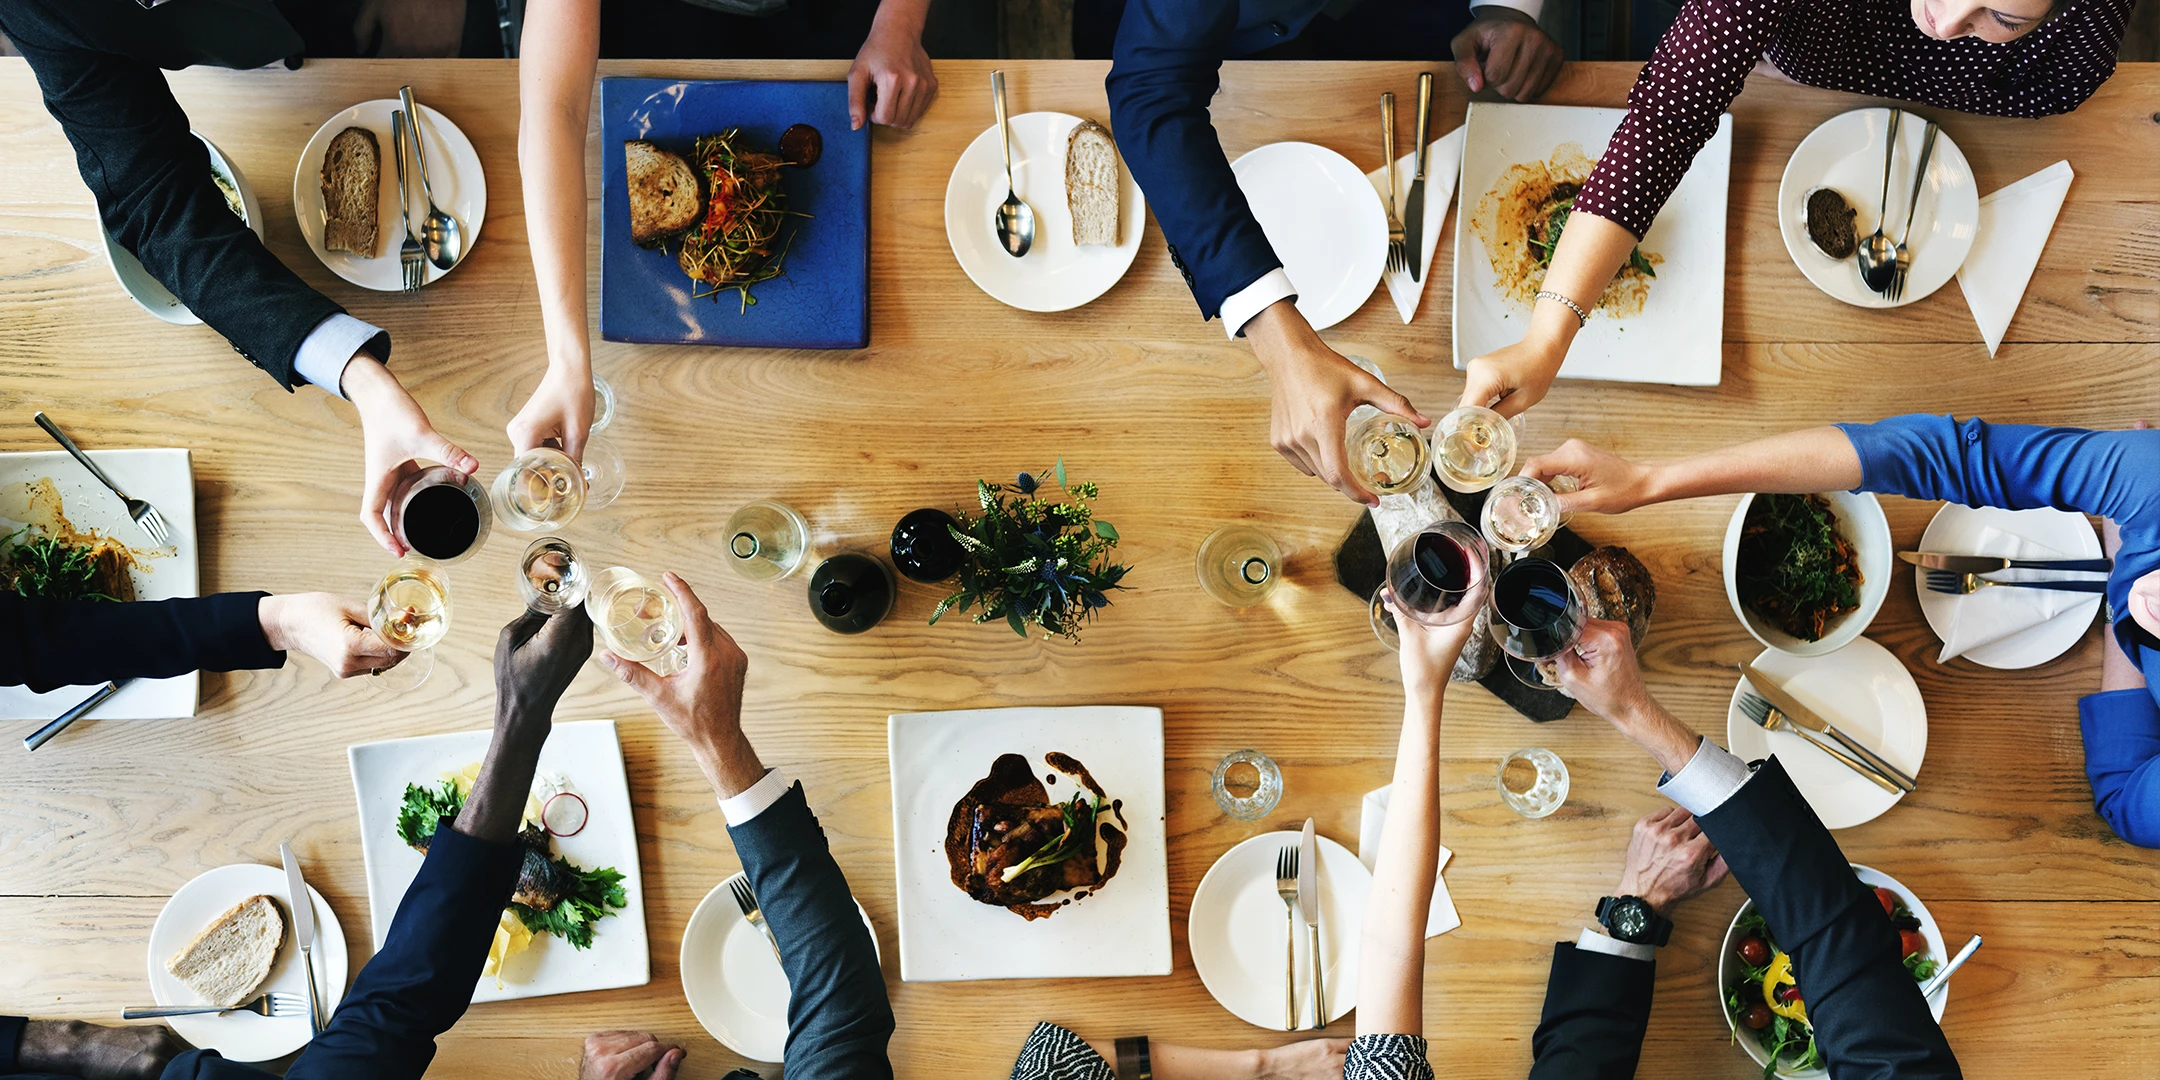 A group of people enjoying a meal together, raising wine glasses in celebration and conversation.